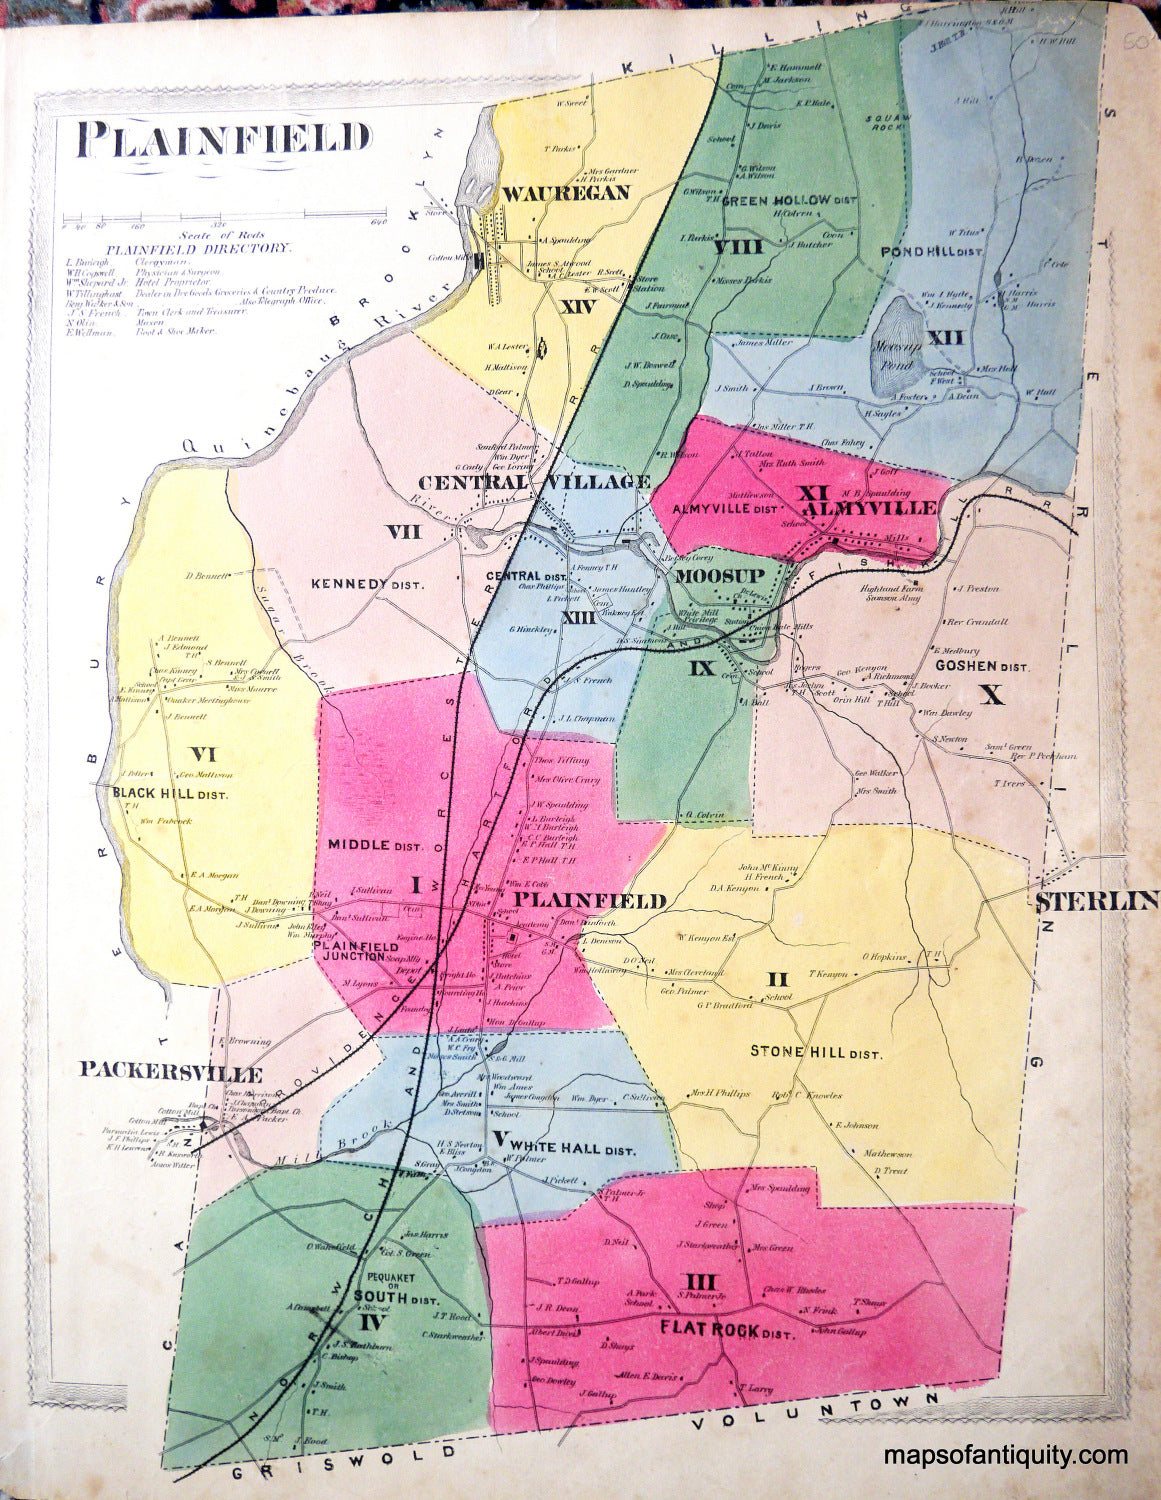 Antique-Hand-Colored-Map-Plainfield-(CT)-United-States-Northeast-1869-Gray/Keeney-Maps-Of-Antiquity